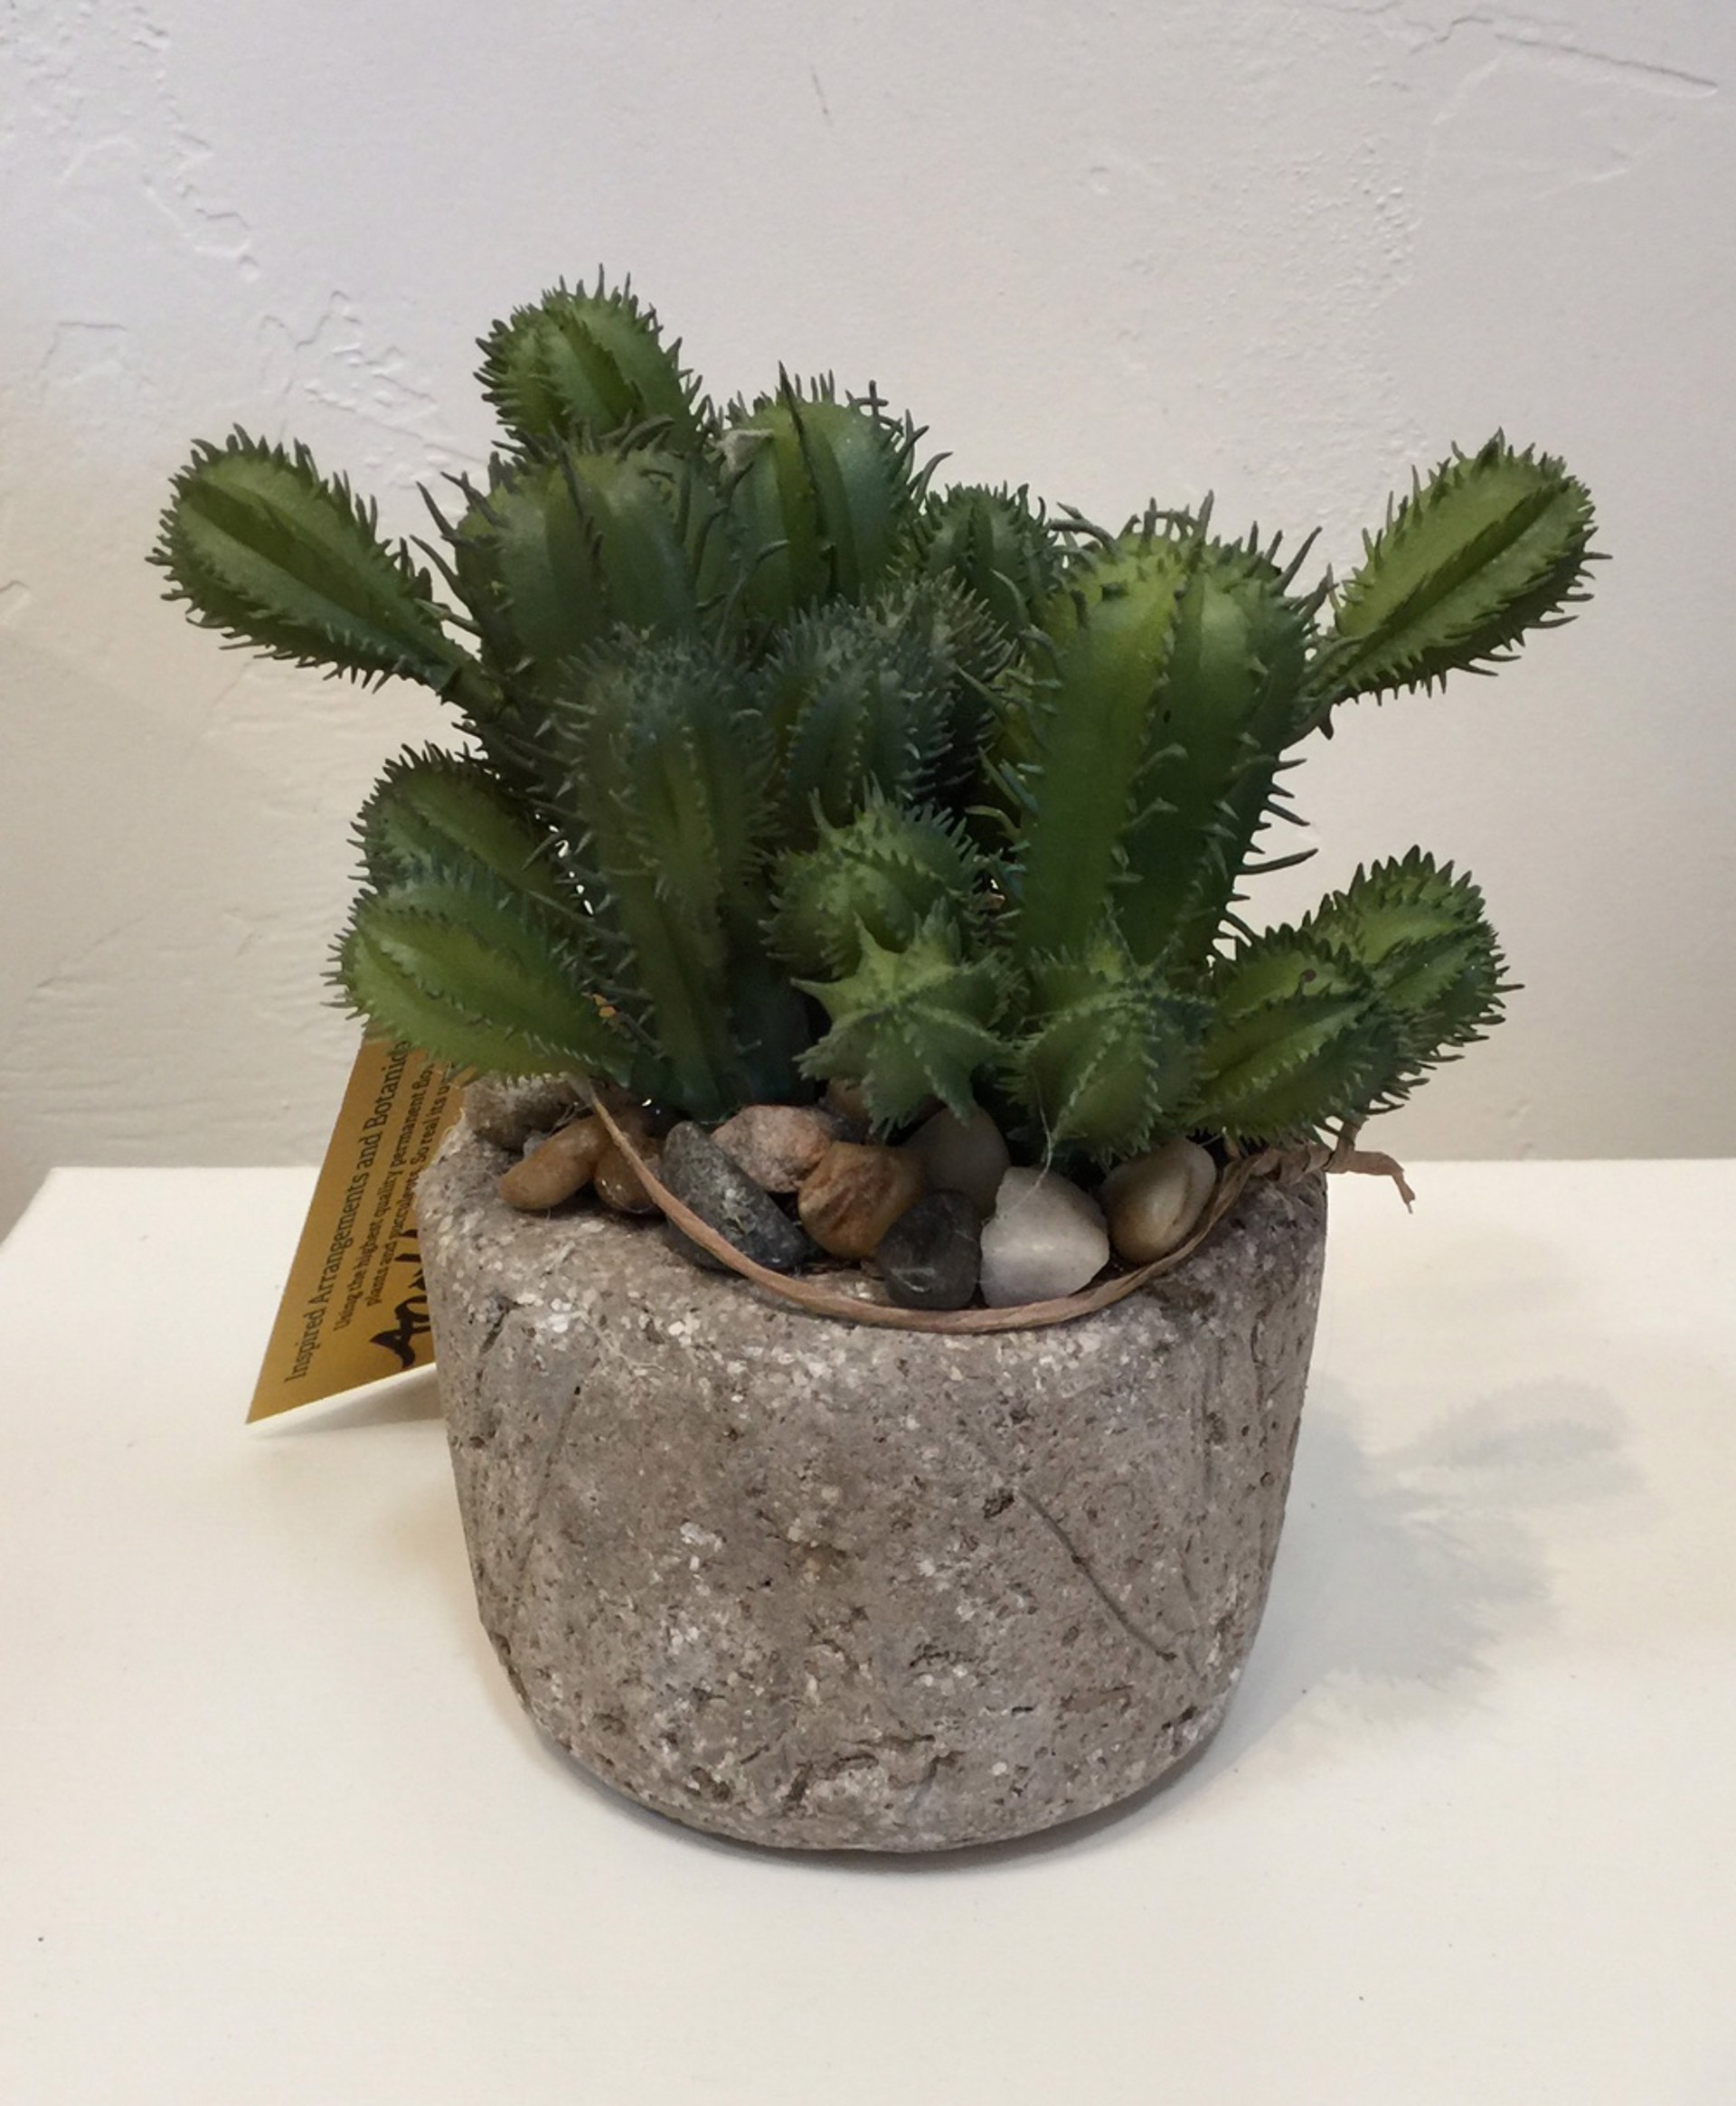 Another Planet - Cacti by Mirage & Bird Botanicals - Ana Thompson